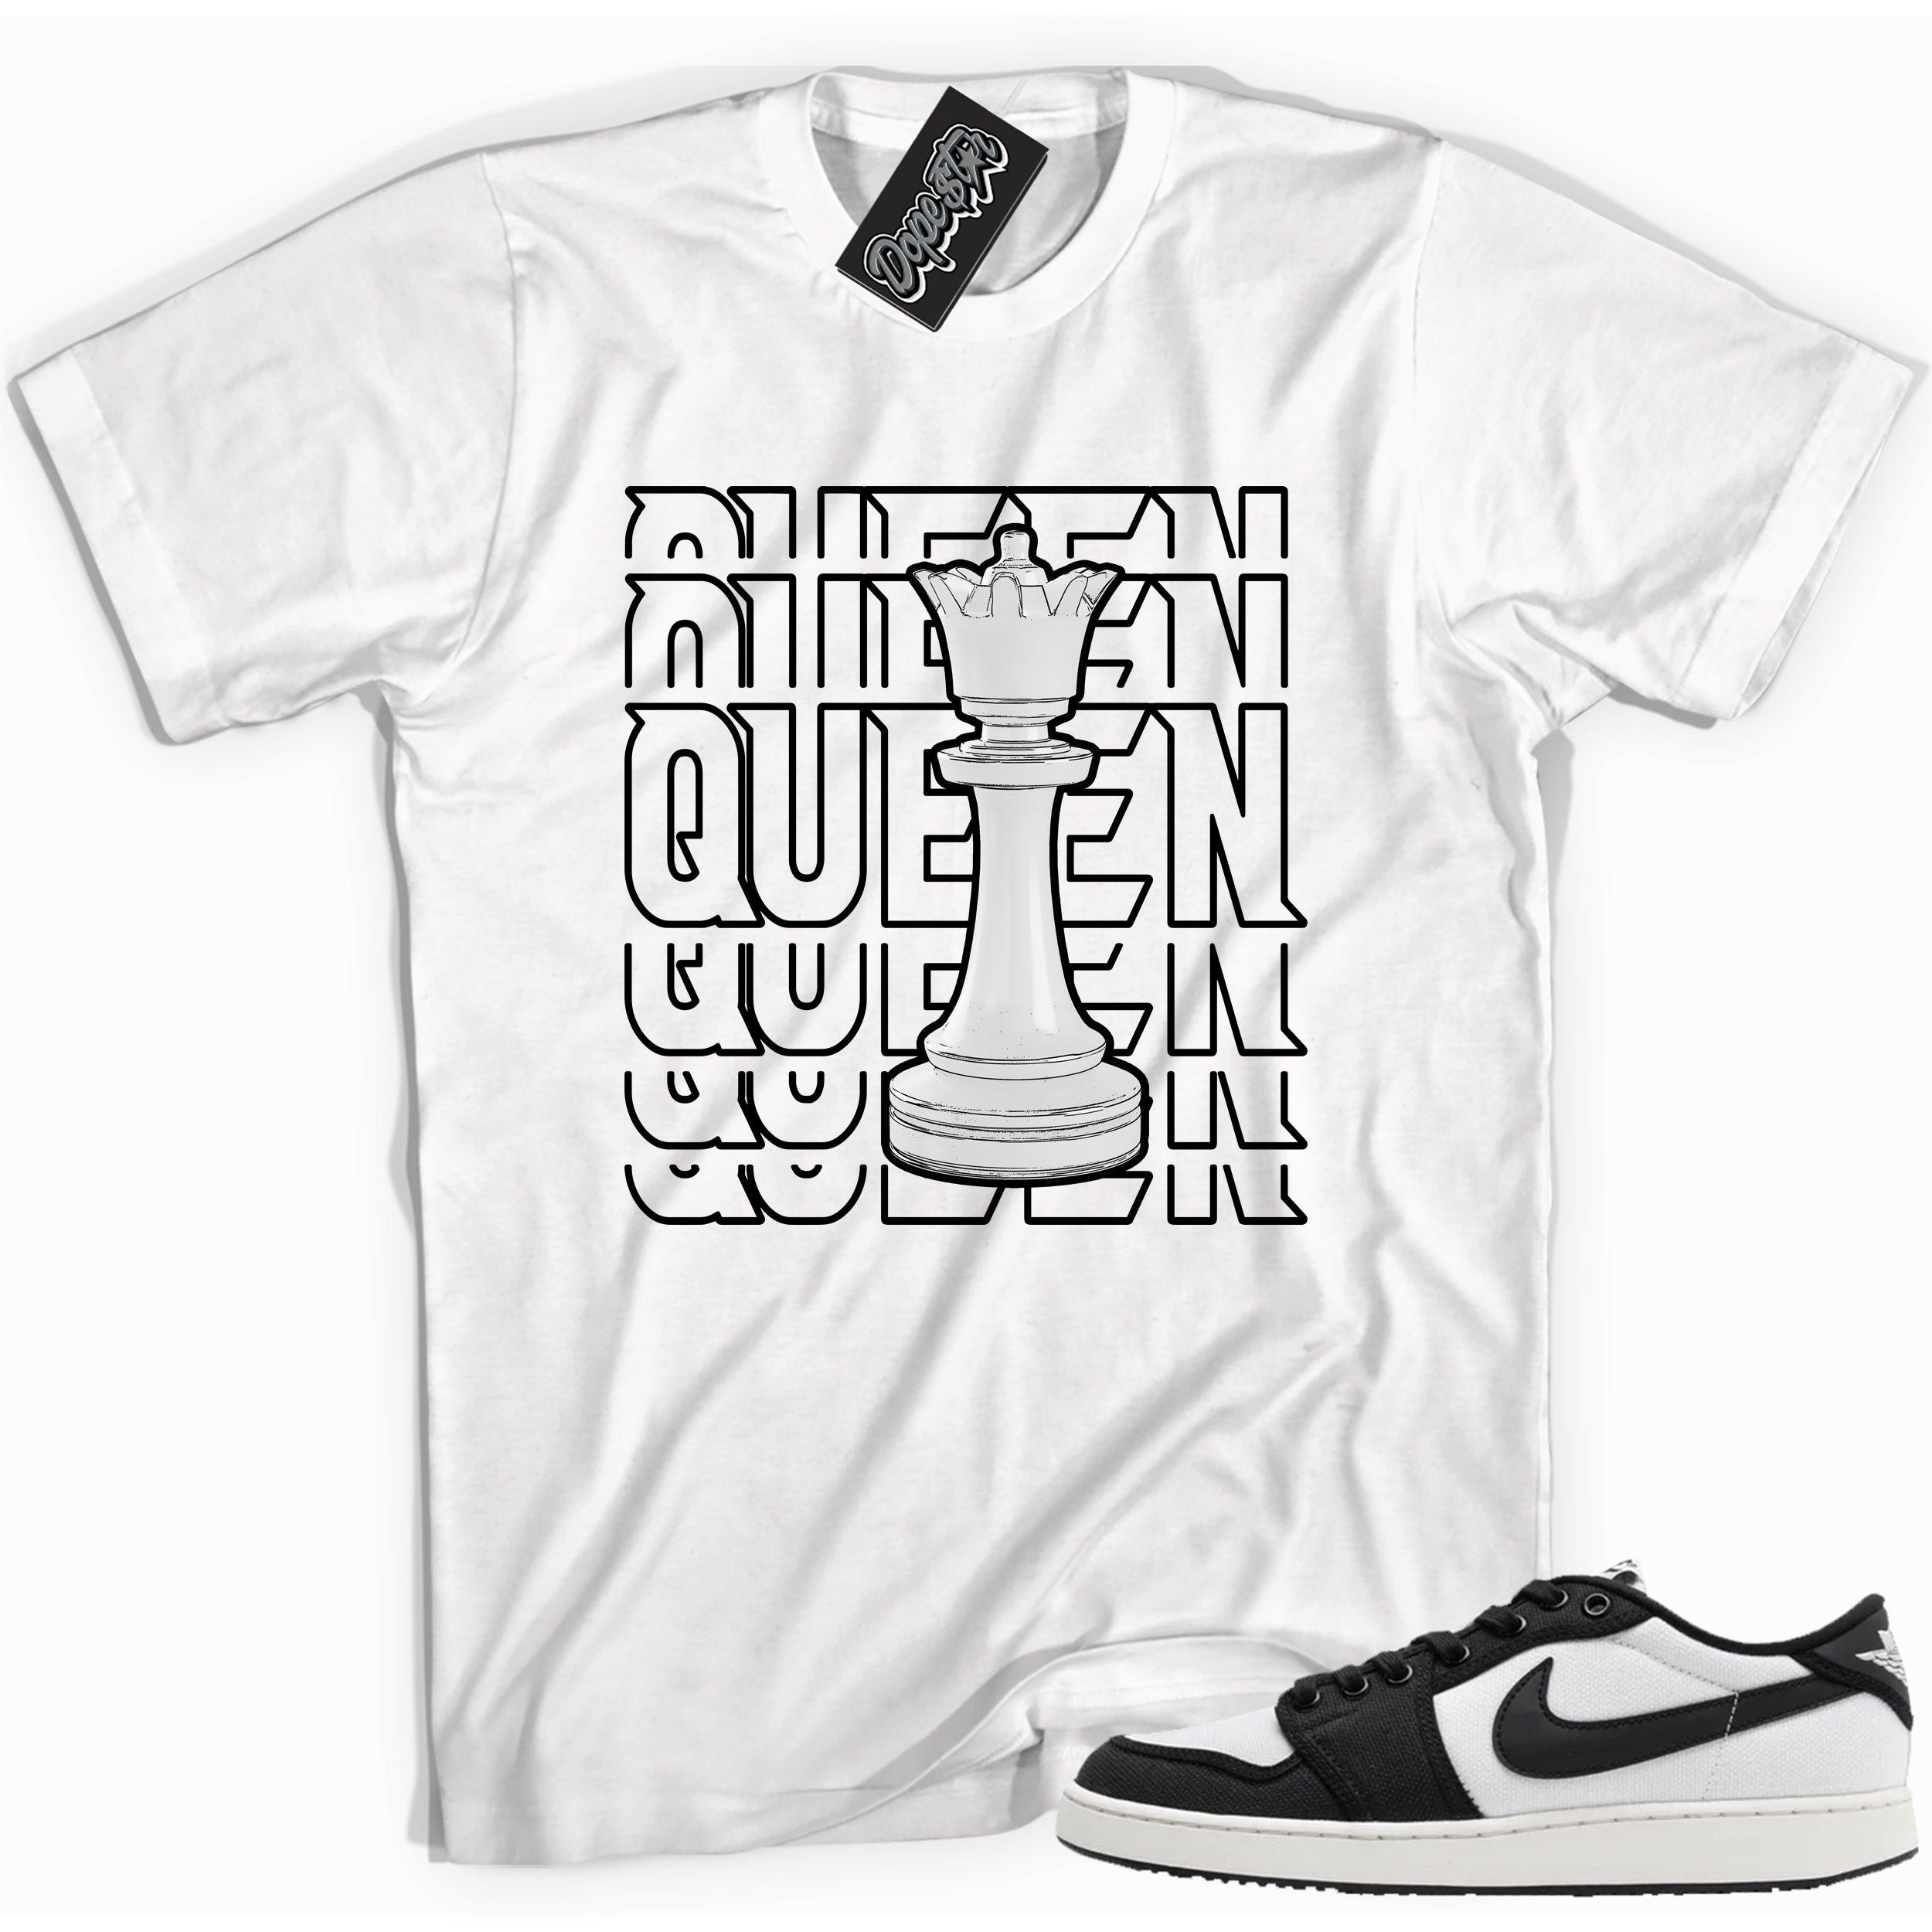 Cool white graphic tee with 'queen chess piece' print, that perfectly matches Air Jordan 1 Retro Ajko Low Black & White sneakers.